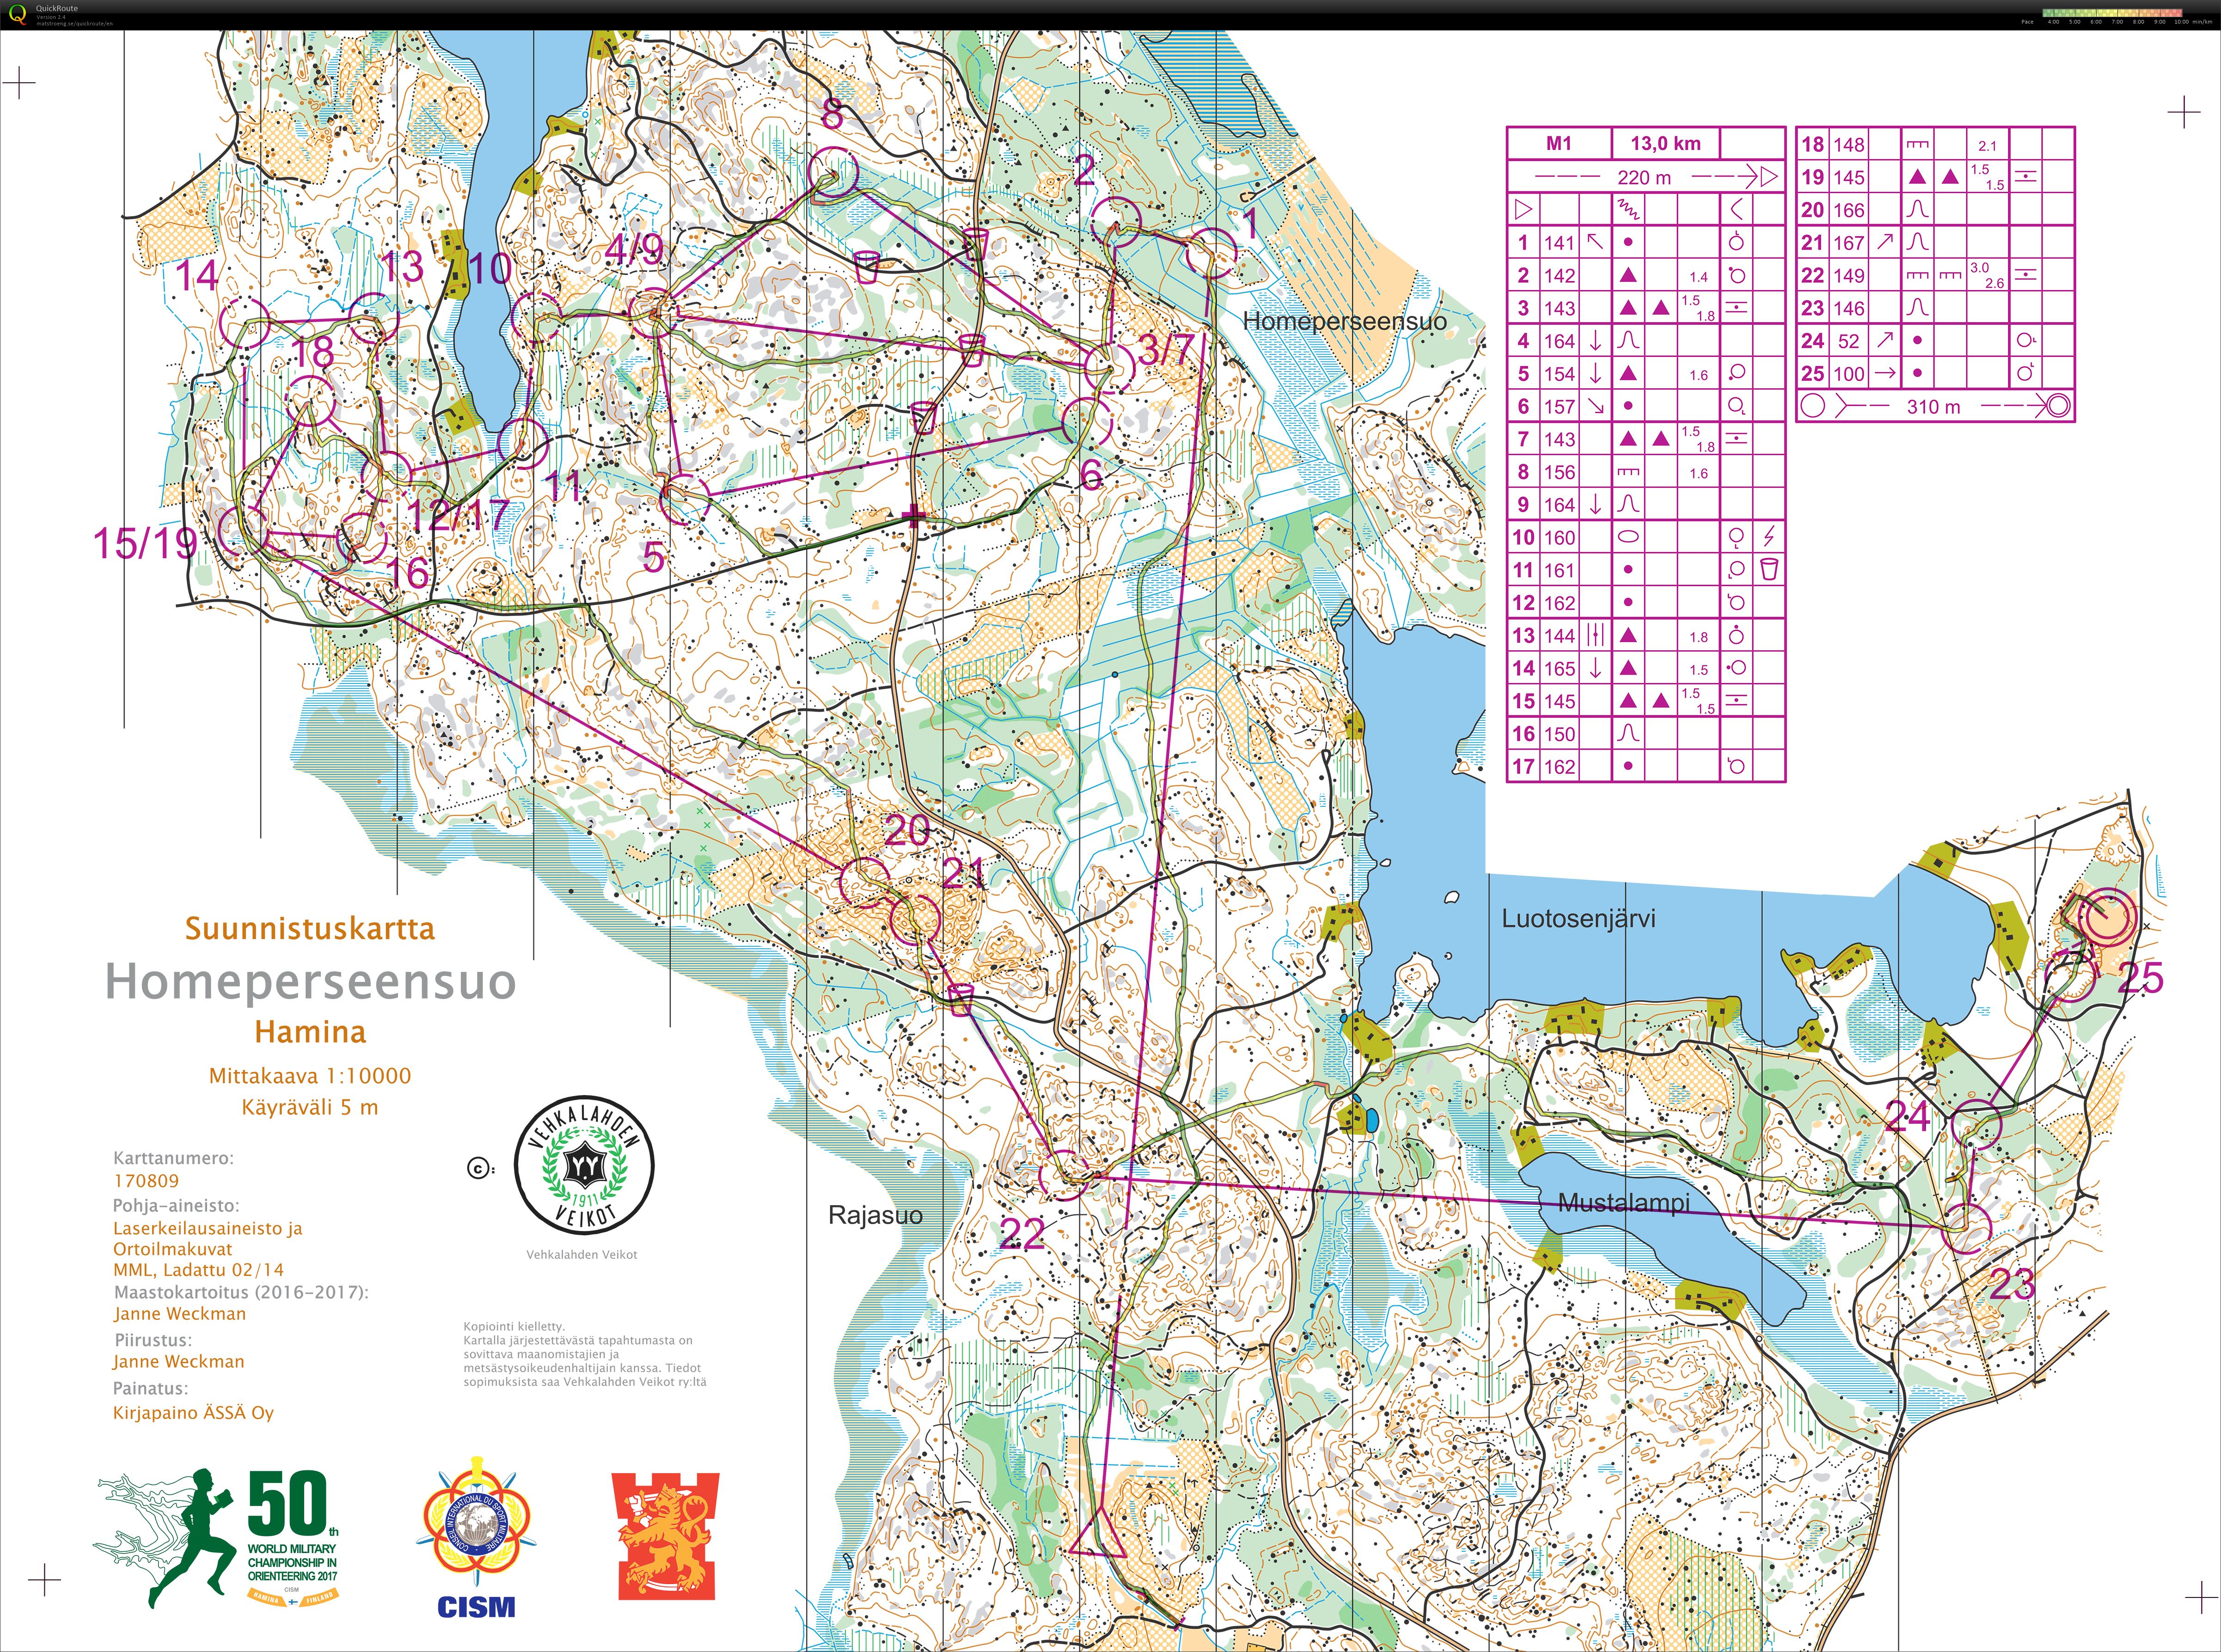 CISM World Military Orienteering Championships | Long (13/06/2017)